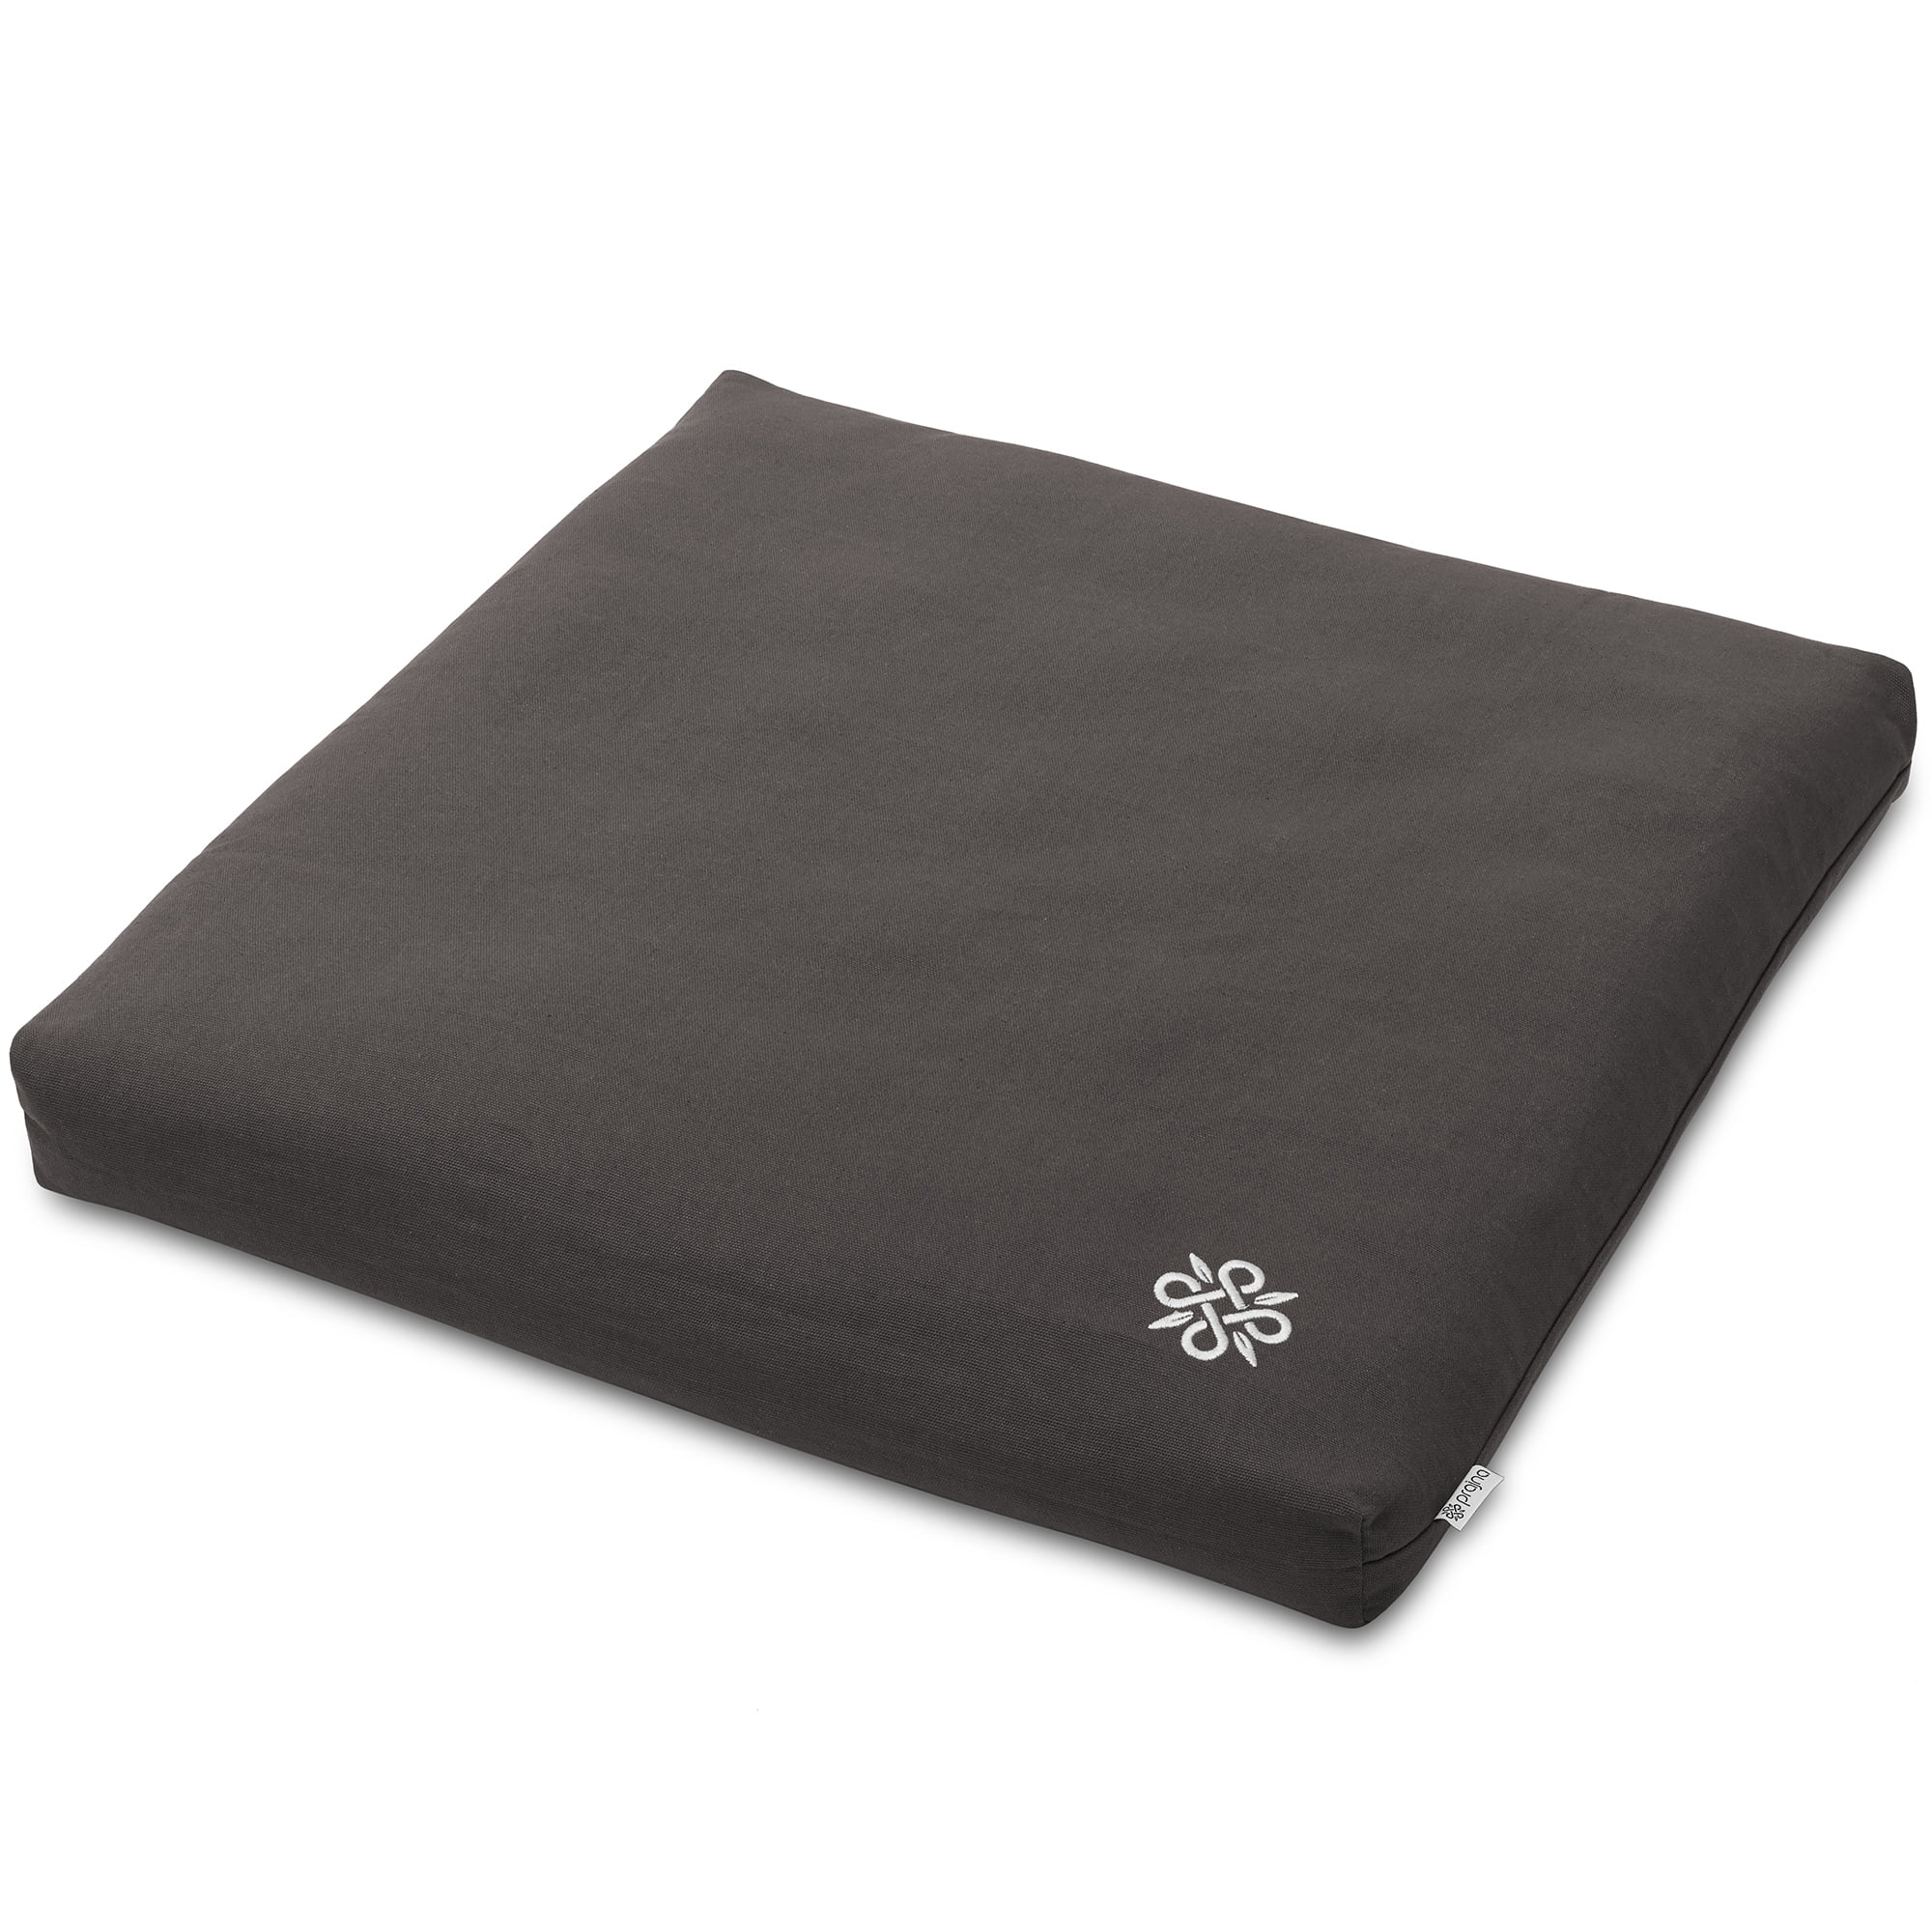 Removable Cover and Carry Handle Floor Pillow with Buckwheat Fill Prajna Meditation Cushion for Travel 